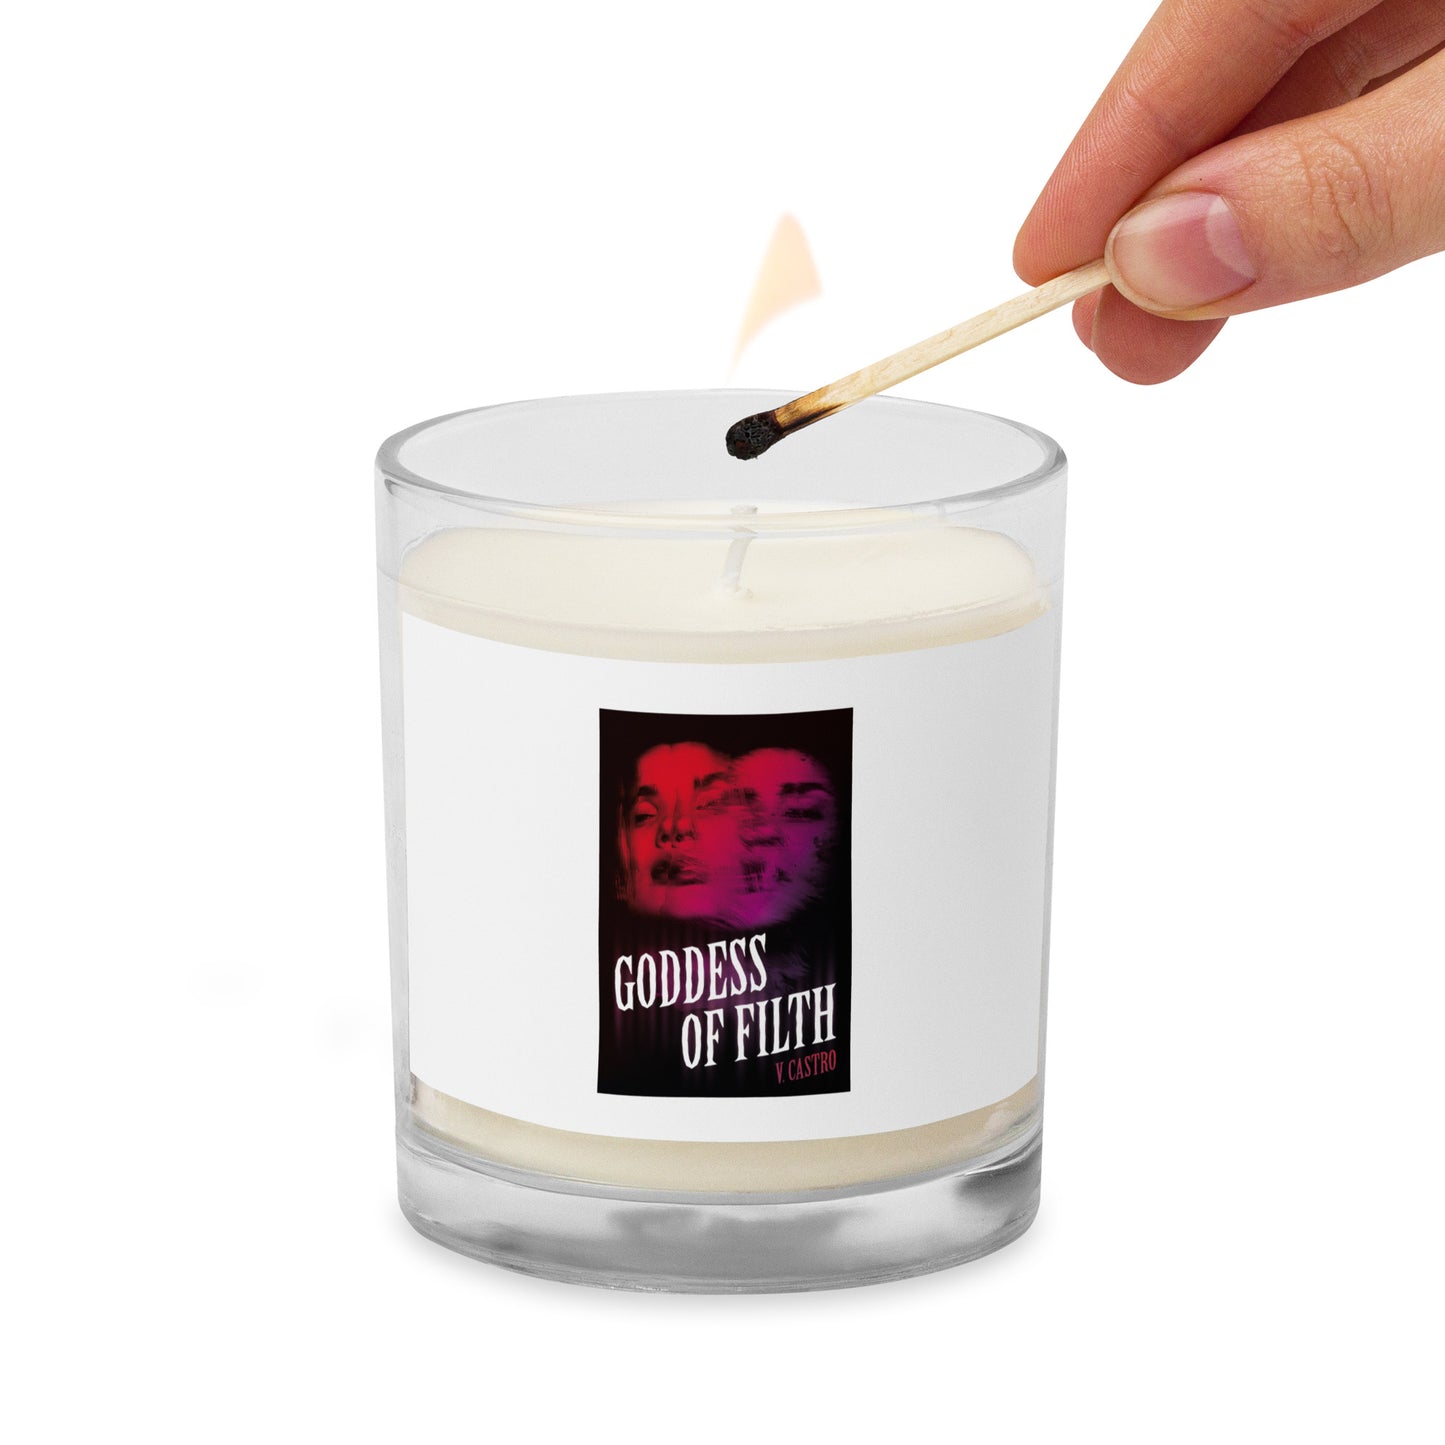 Goddess of Filth glass jar soy wax candle